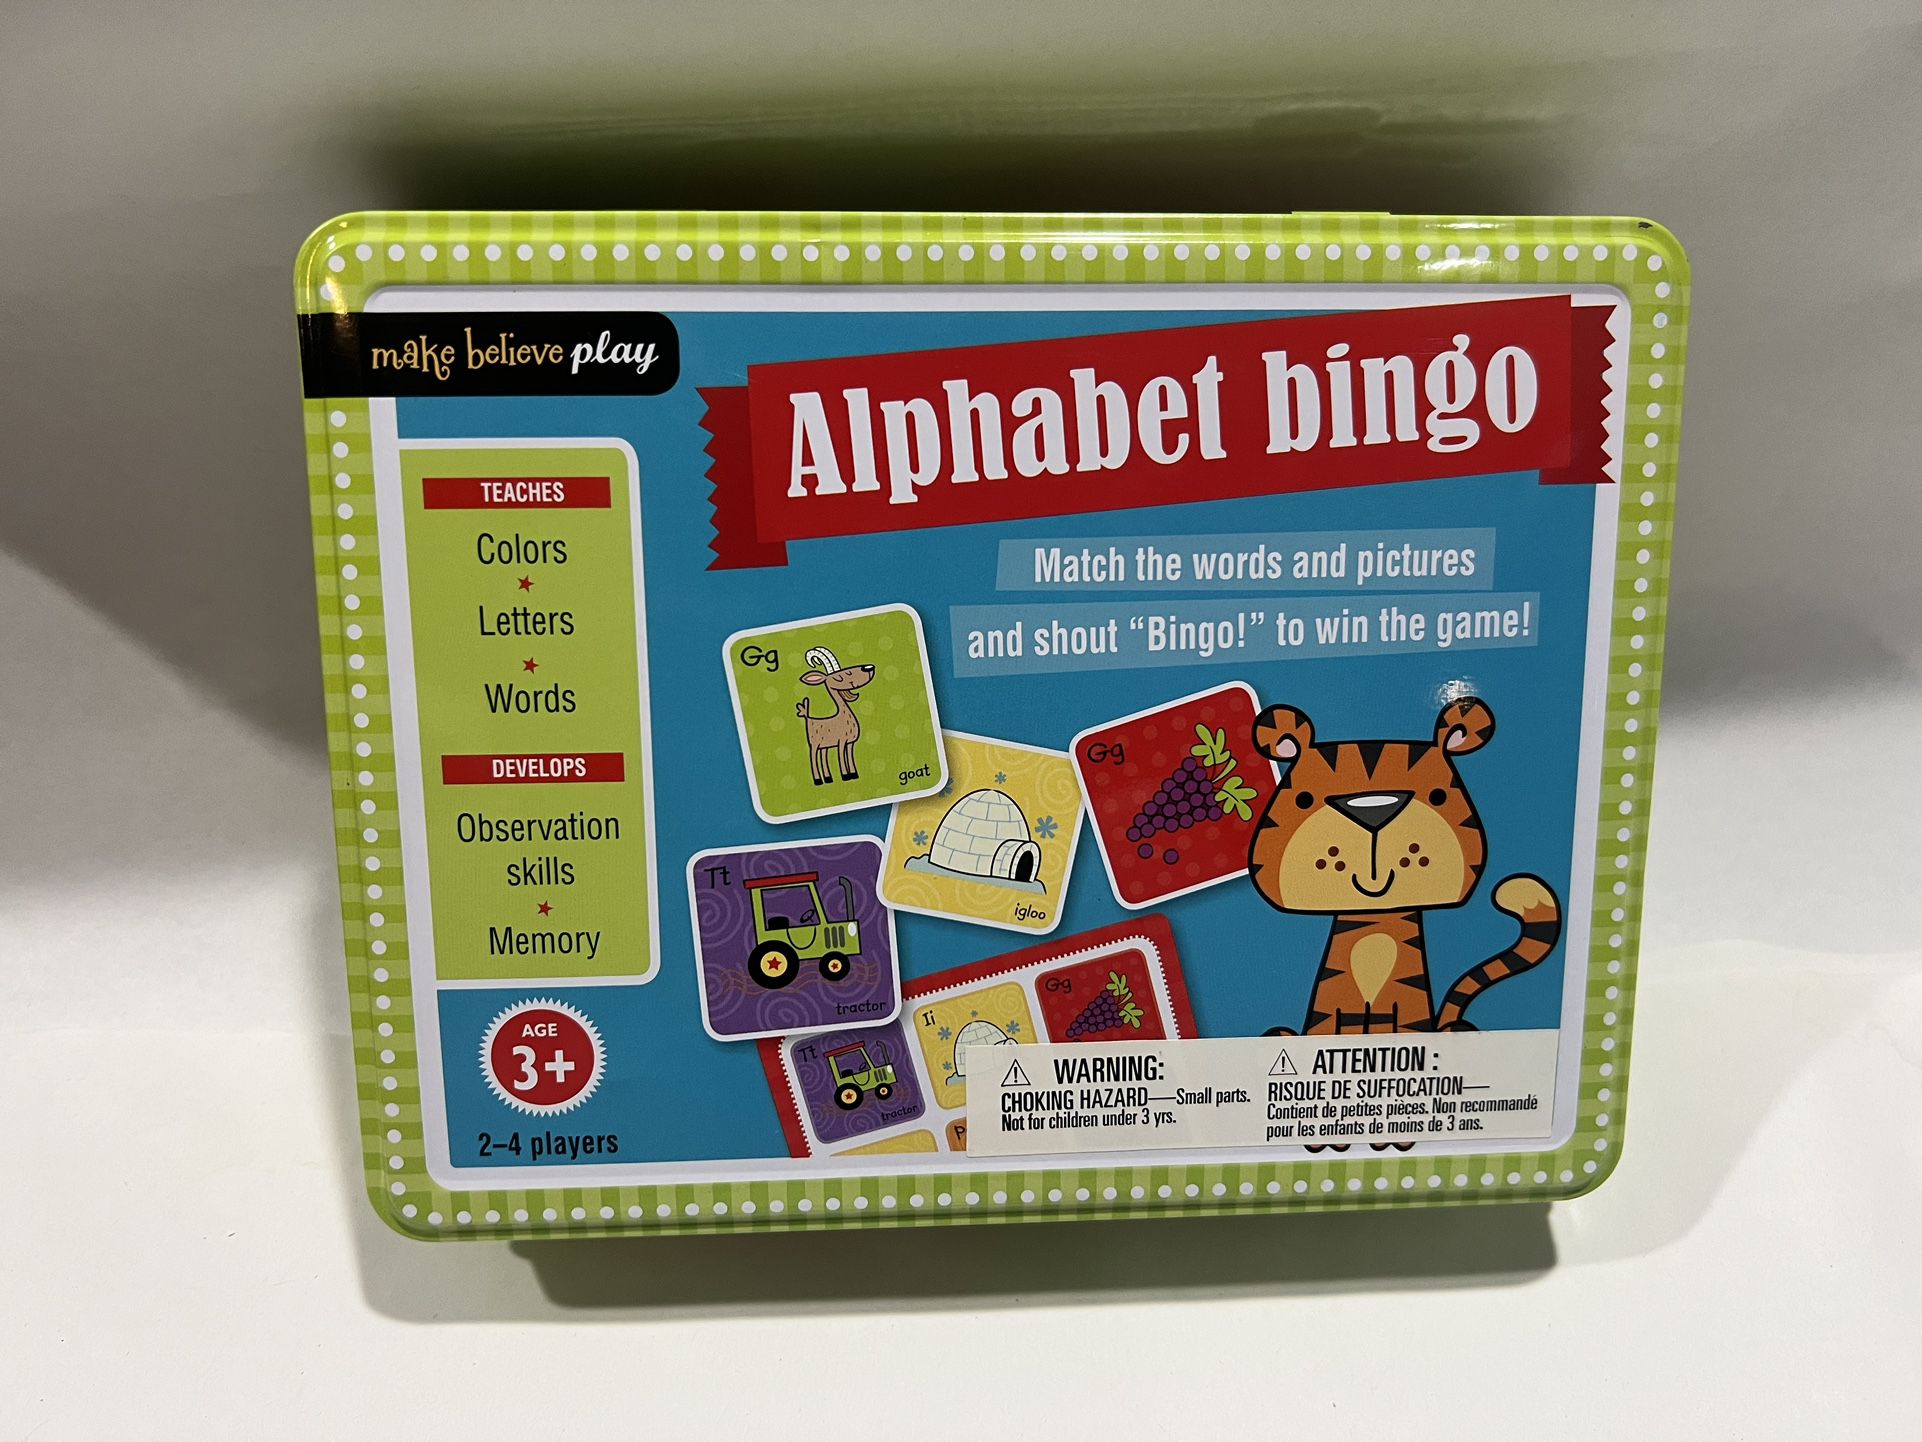 Alphabet Bingo Game for Kids 2-4 Players, Letter Learning School Class